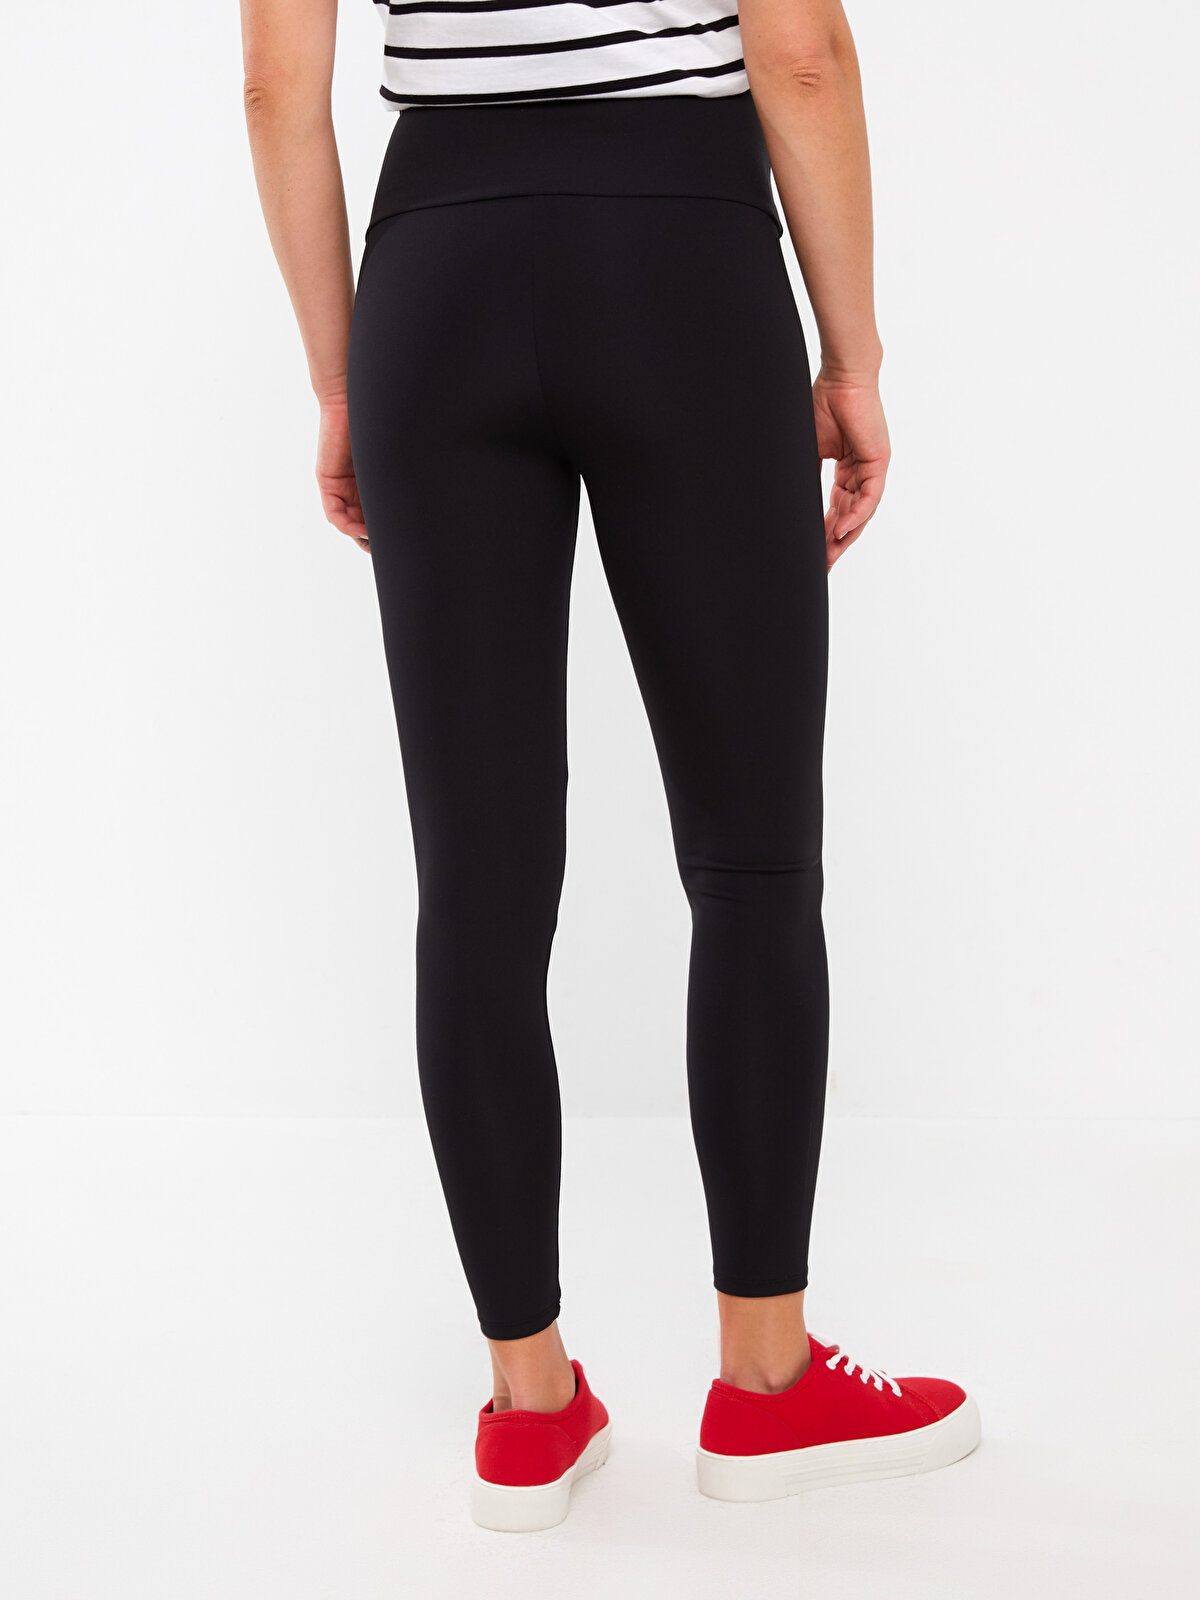 Sexy Double Zipper Cotton Fleece Lined Maternity Leggings For Women Open  Crotch Dress, Seamless, Perfect For Outdoor Sports And Clubwear From Tchai,  $22.66